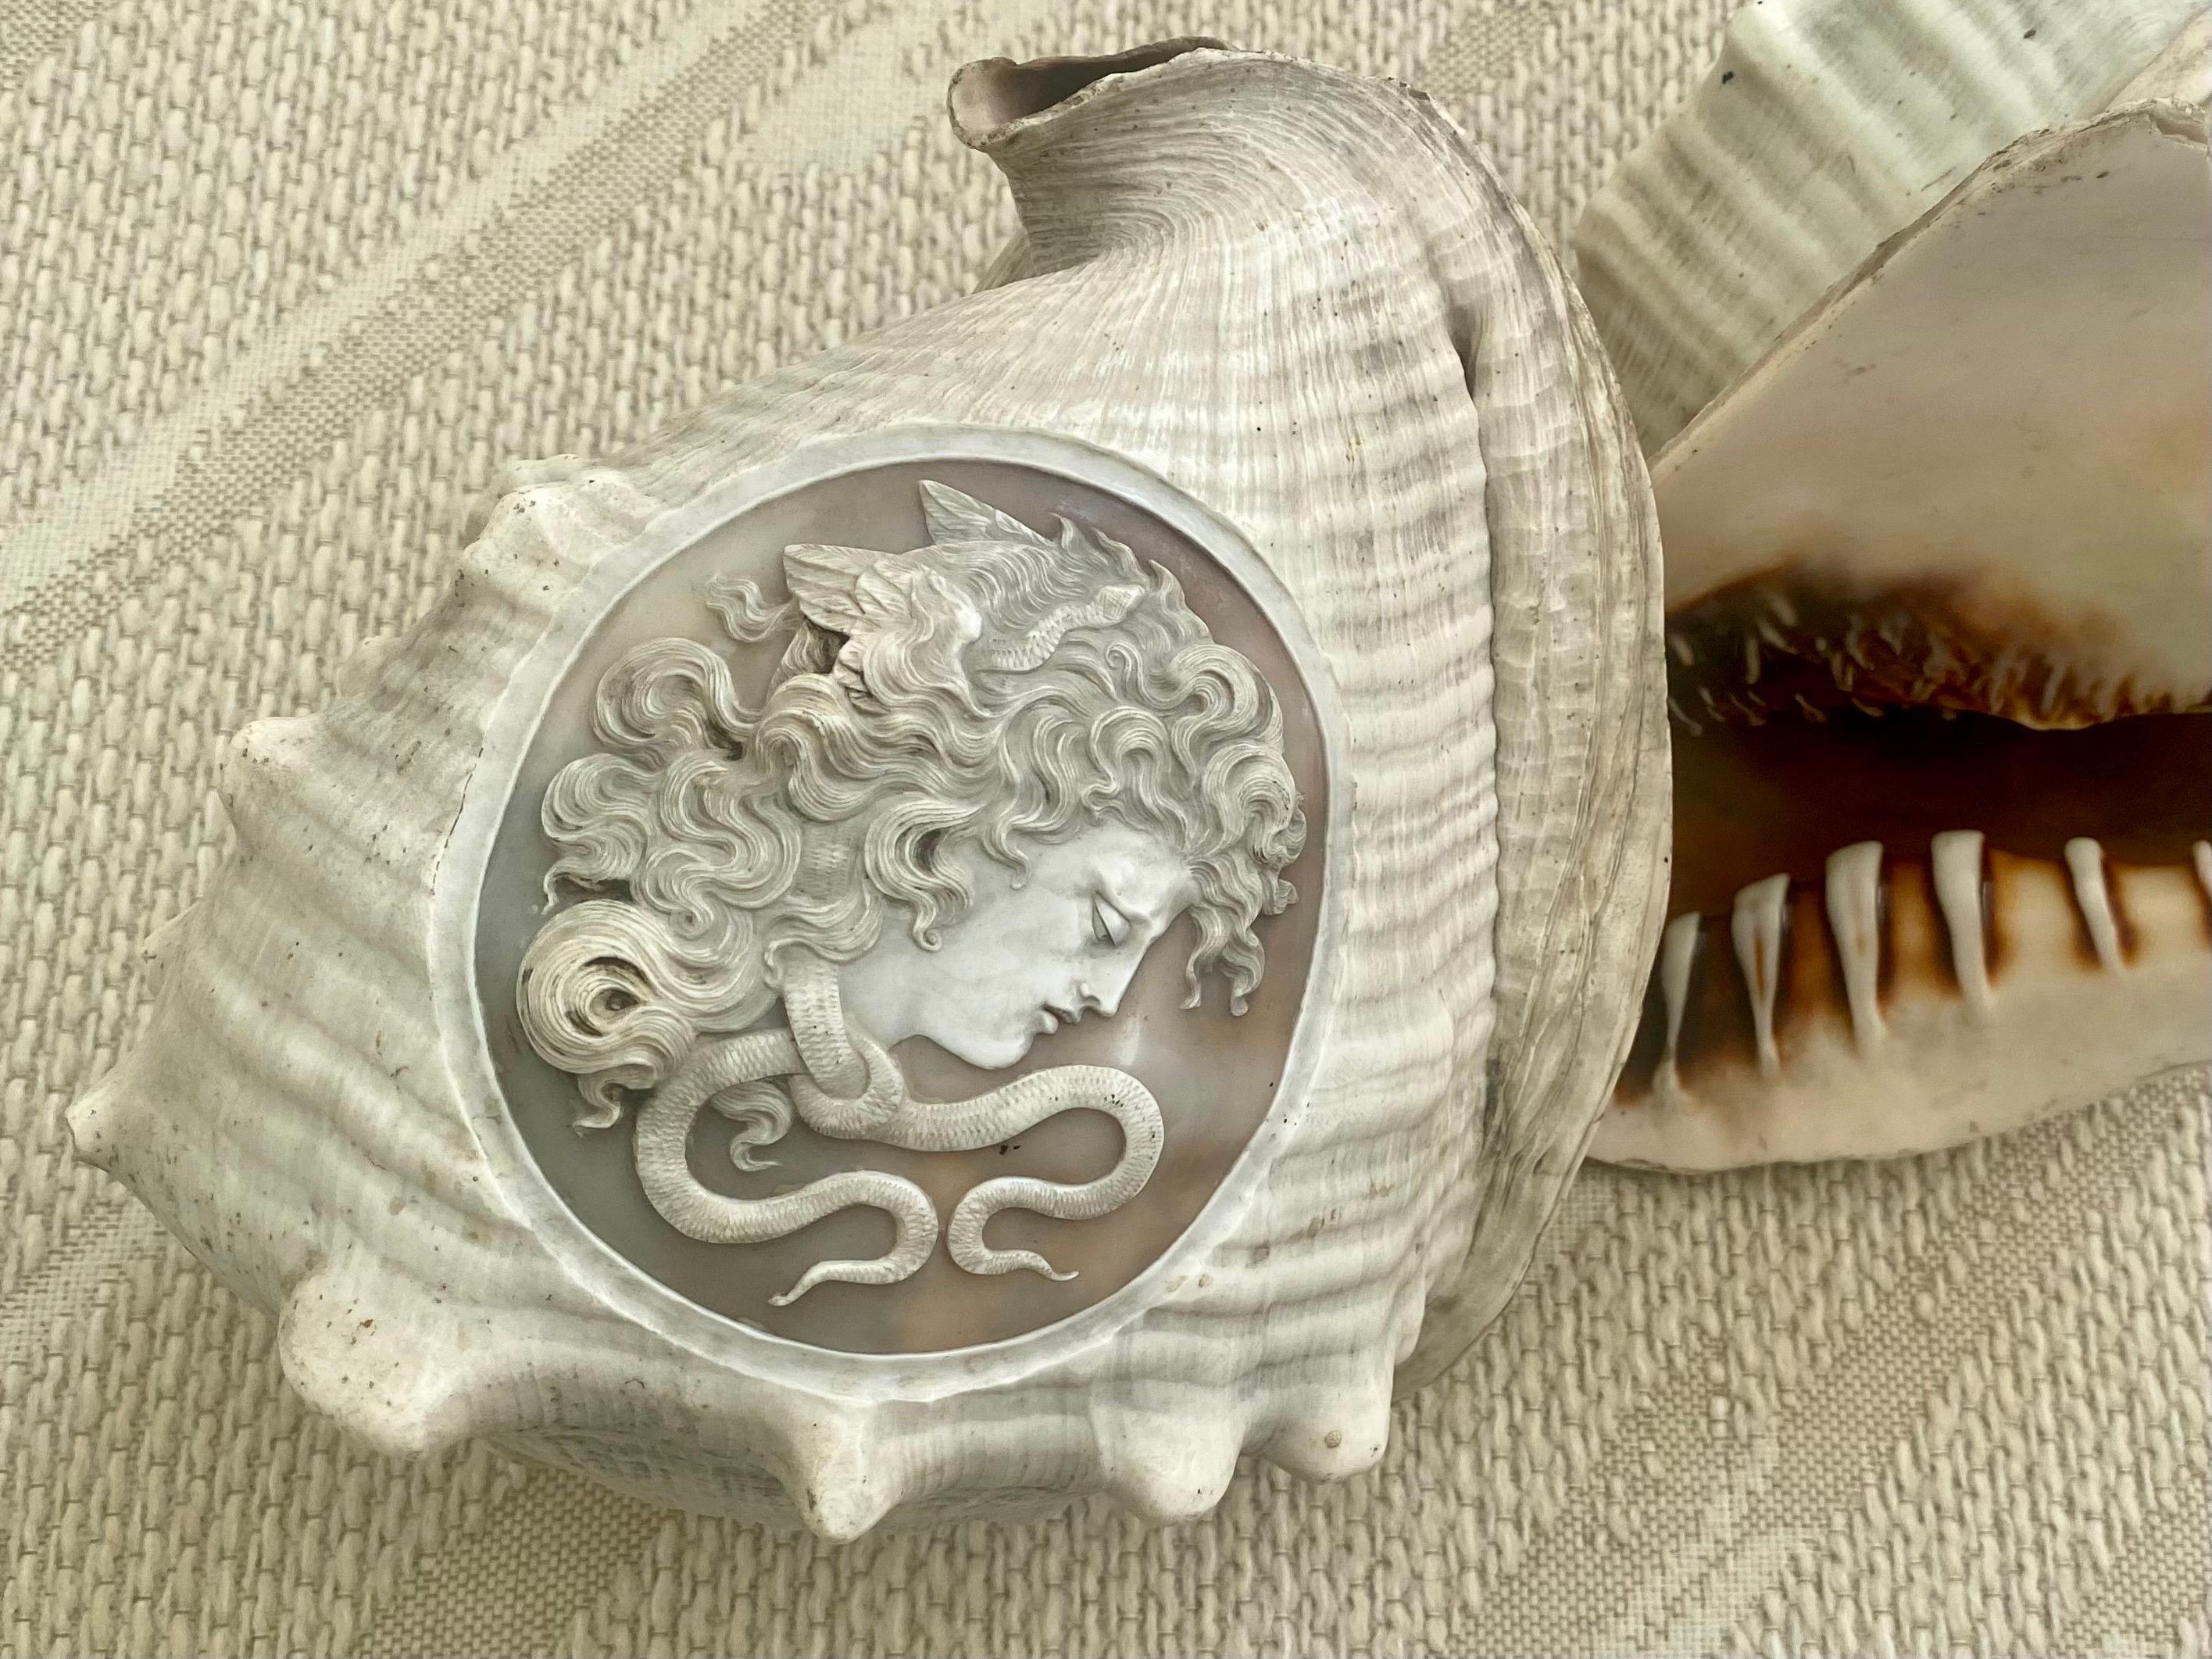 conch shell carving